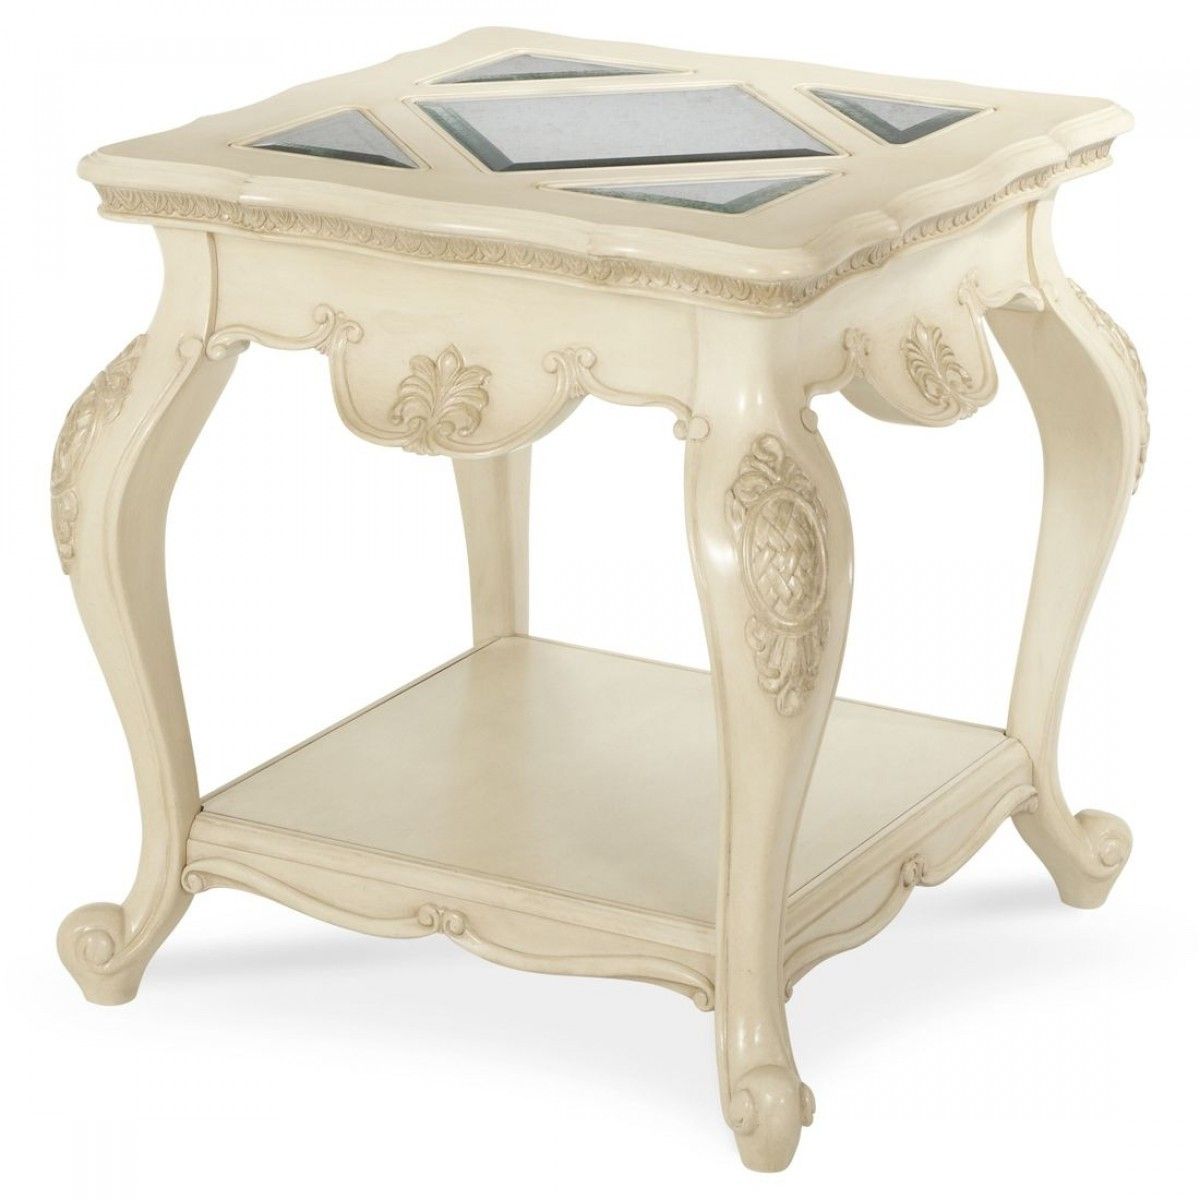 Aico Michael Amini Lavelle Blanc End Table Regarding Marcus Oyster 6 Piece Sectionals With Power Headrest And Usb (View 21 of 30)